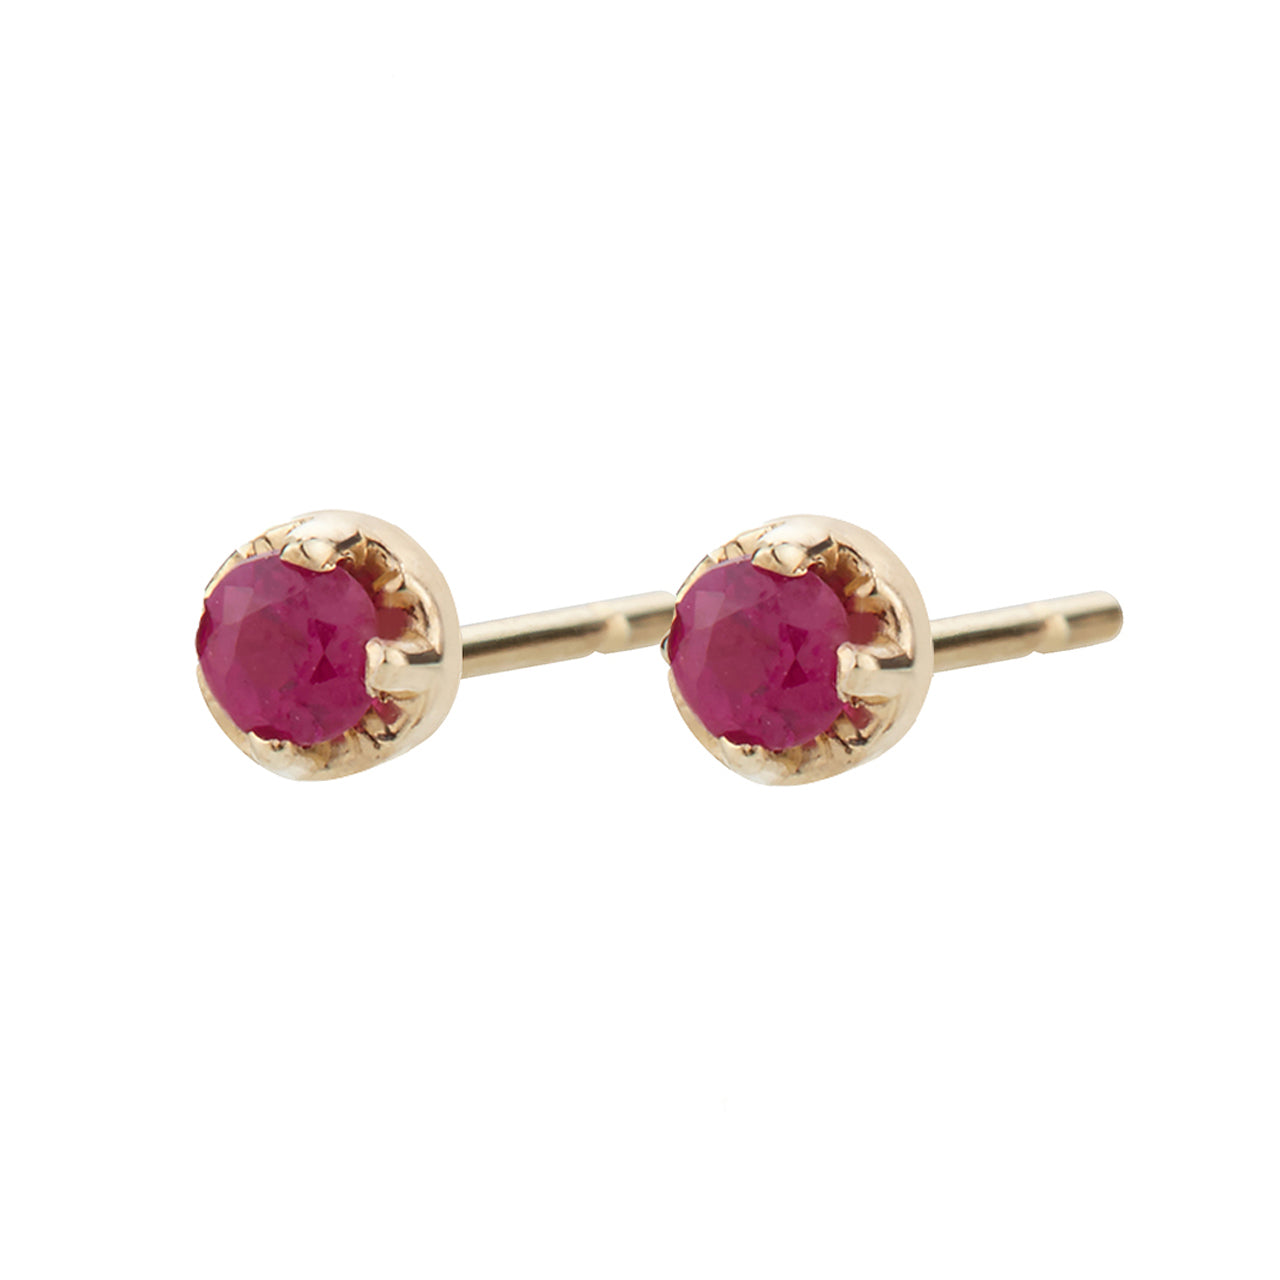 Large ruby prong studs